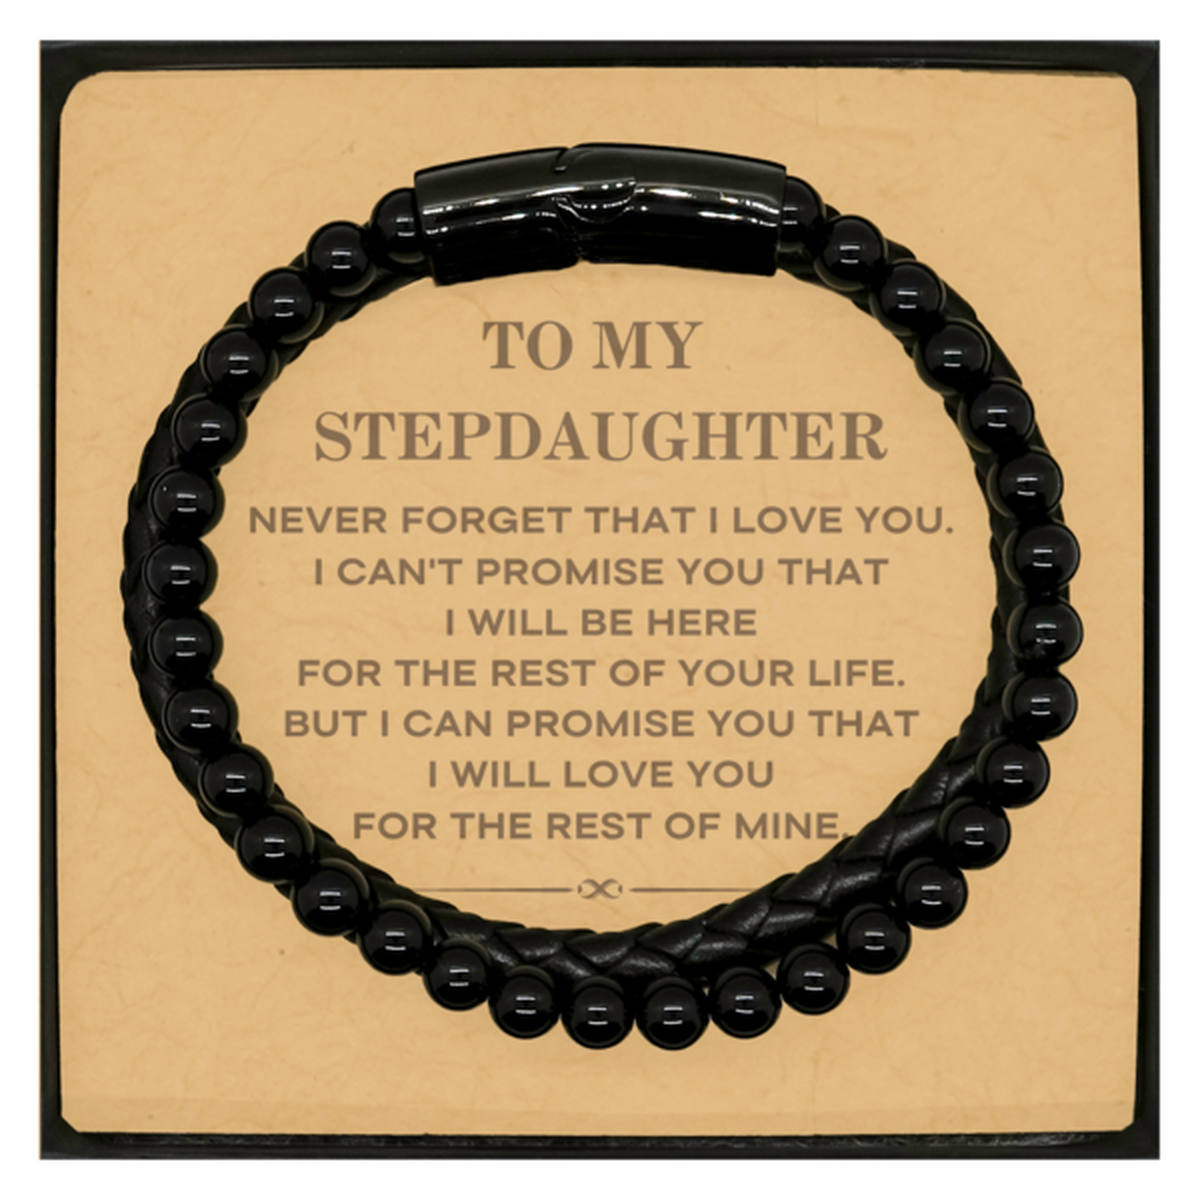 To My Stepdaughter Gifts, I will love you for the rest of mine, Love Stepdaughter Bracelet, Birthday Christmas Unique Stone Leather Bracelets For Stepdaughter